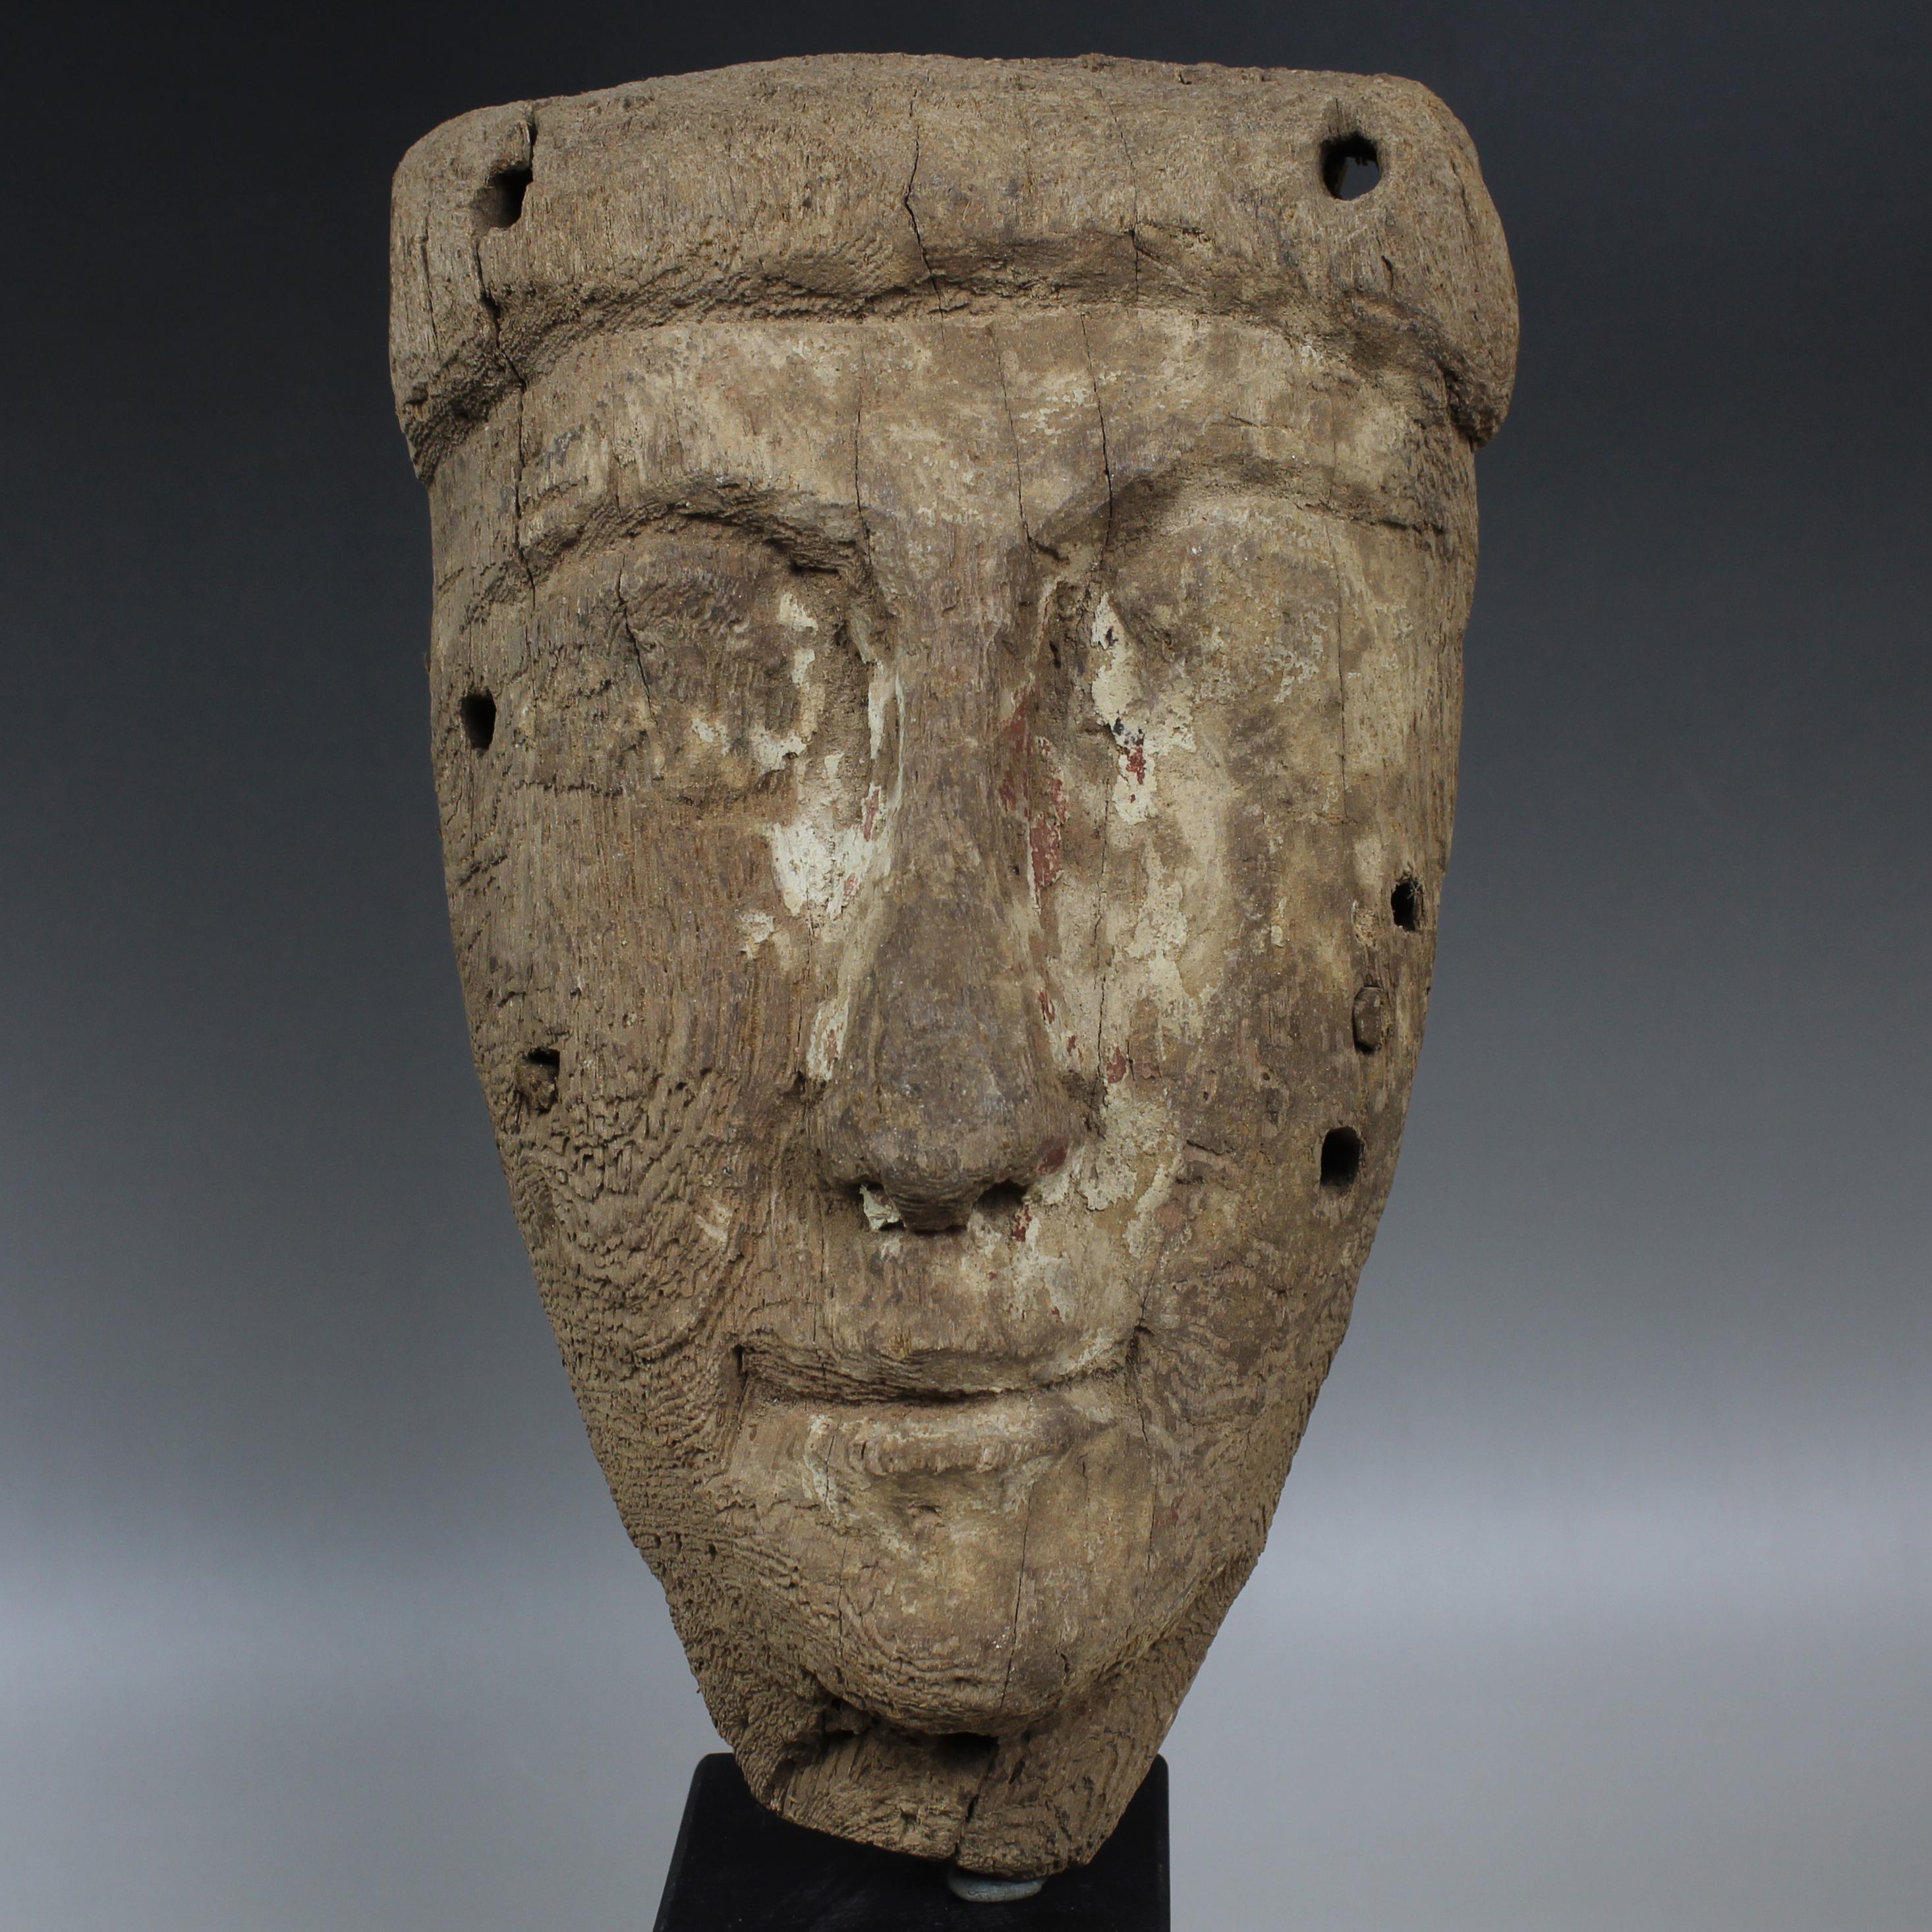 ITEM: Sarcophagus mask
MATERIAL: Wood
CULTURE: Egyptian, Late period
PERIOD: Late Period, 664 – 332 B.C
DIMENSIONS: 205 mm x 130 mm
CONDITION: Good condition
PROVENANCE: Ex French private collection, acquired between 1970 – 1990

Comes with